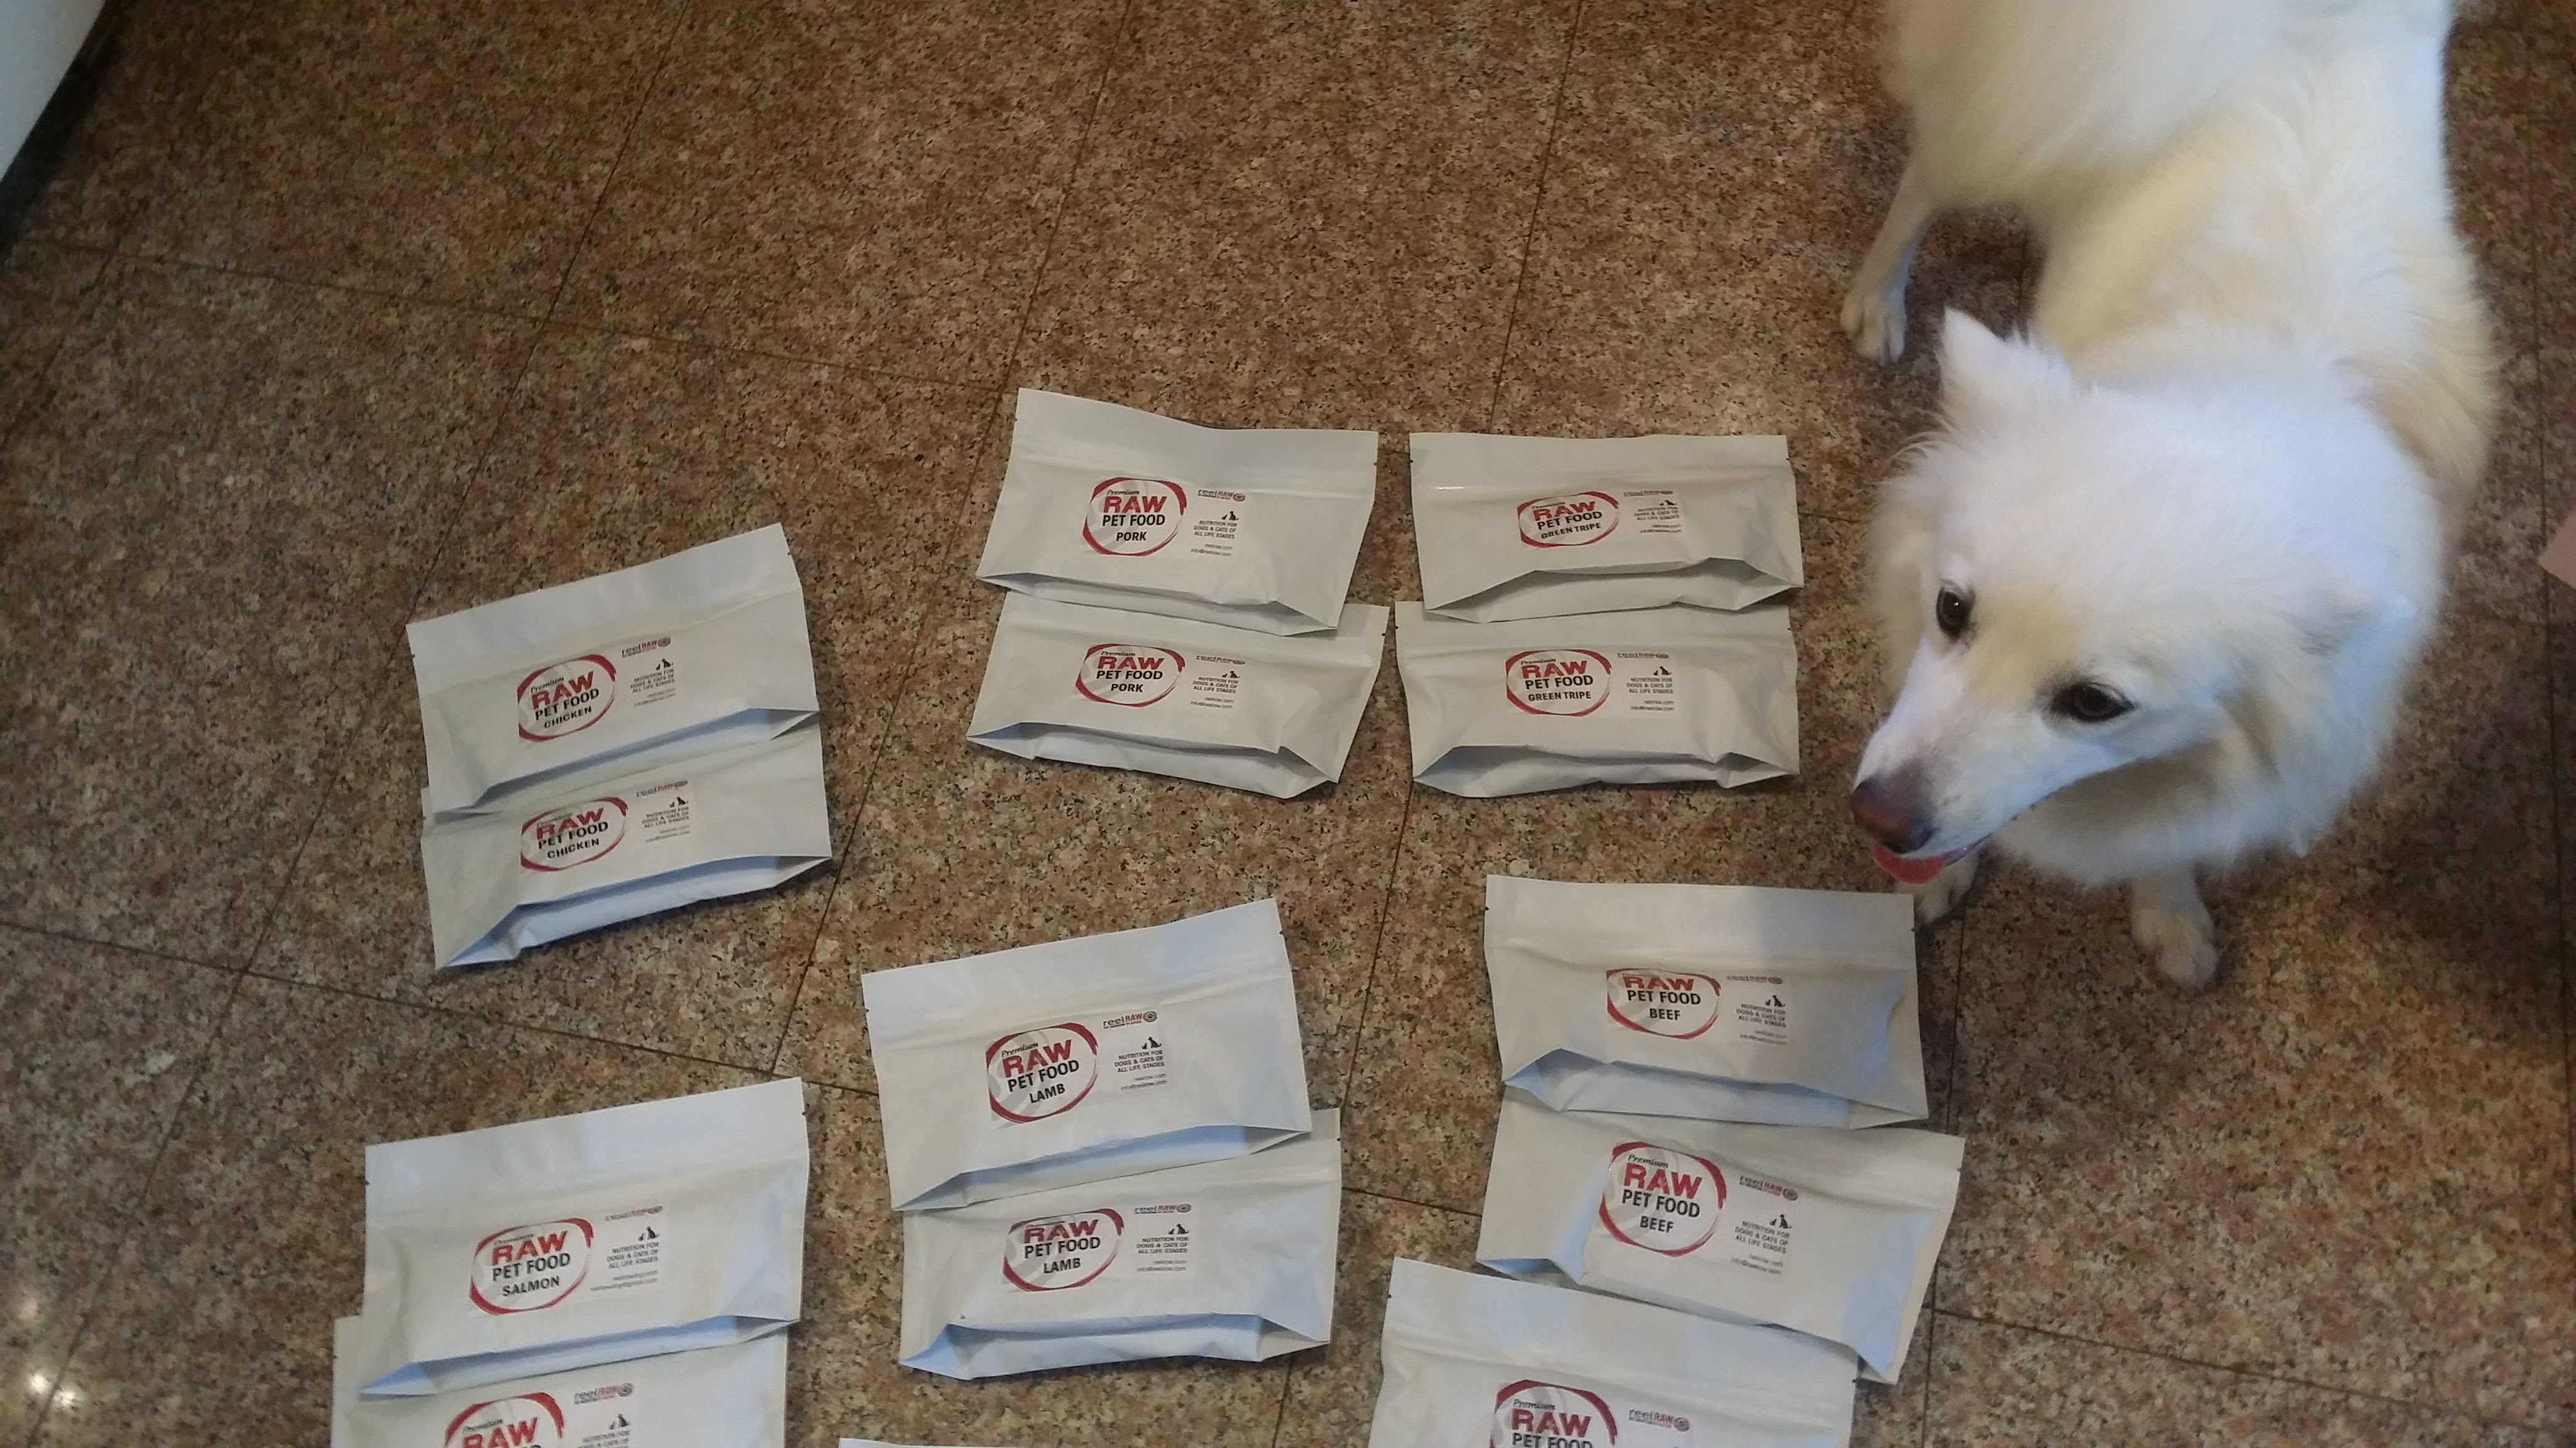 reel raw dog food delivery service